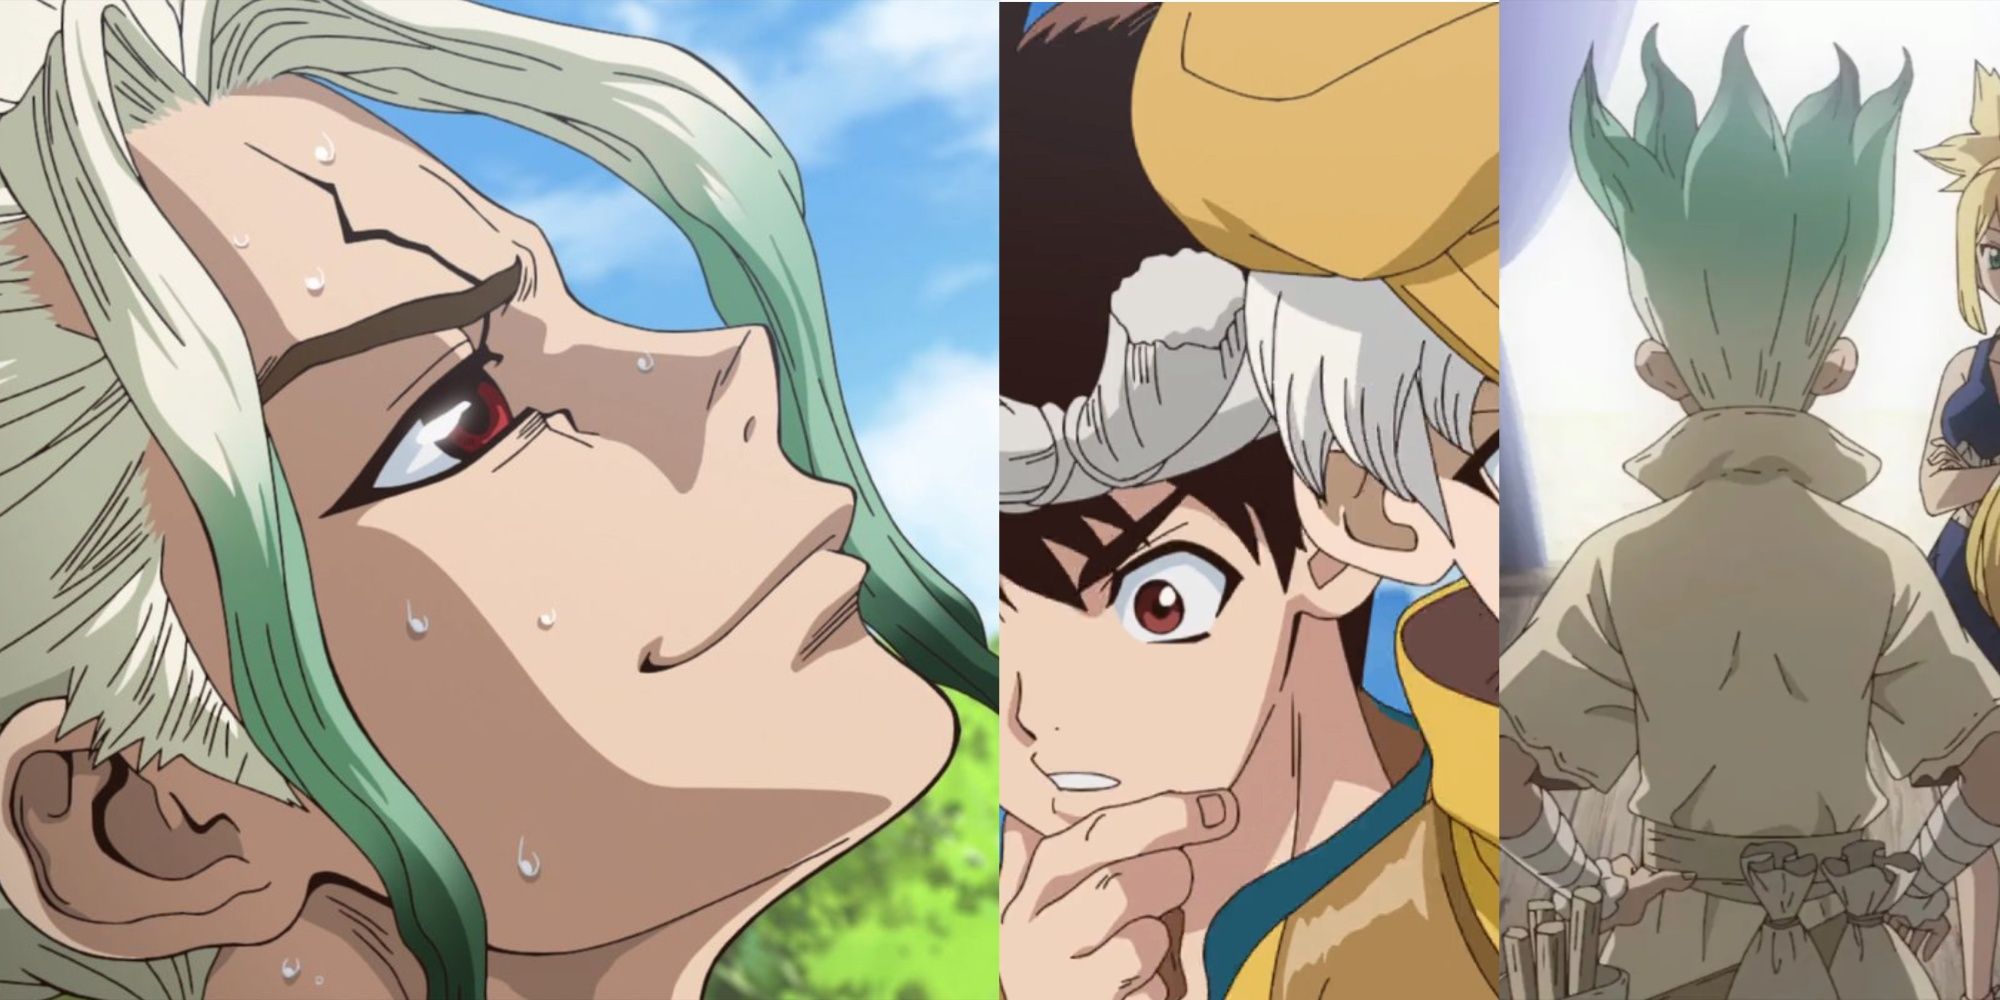 Dr. Stone 3 Episode 5 - Gallery Post - I drink and watch anime